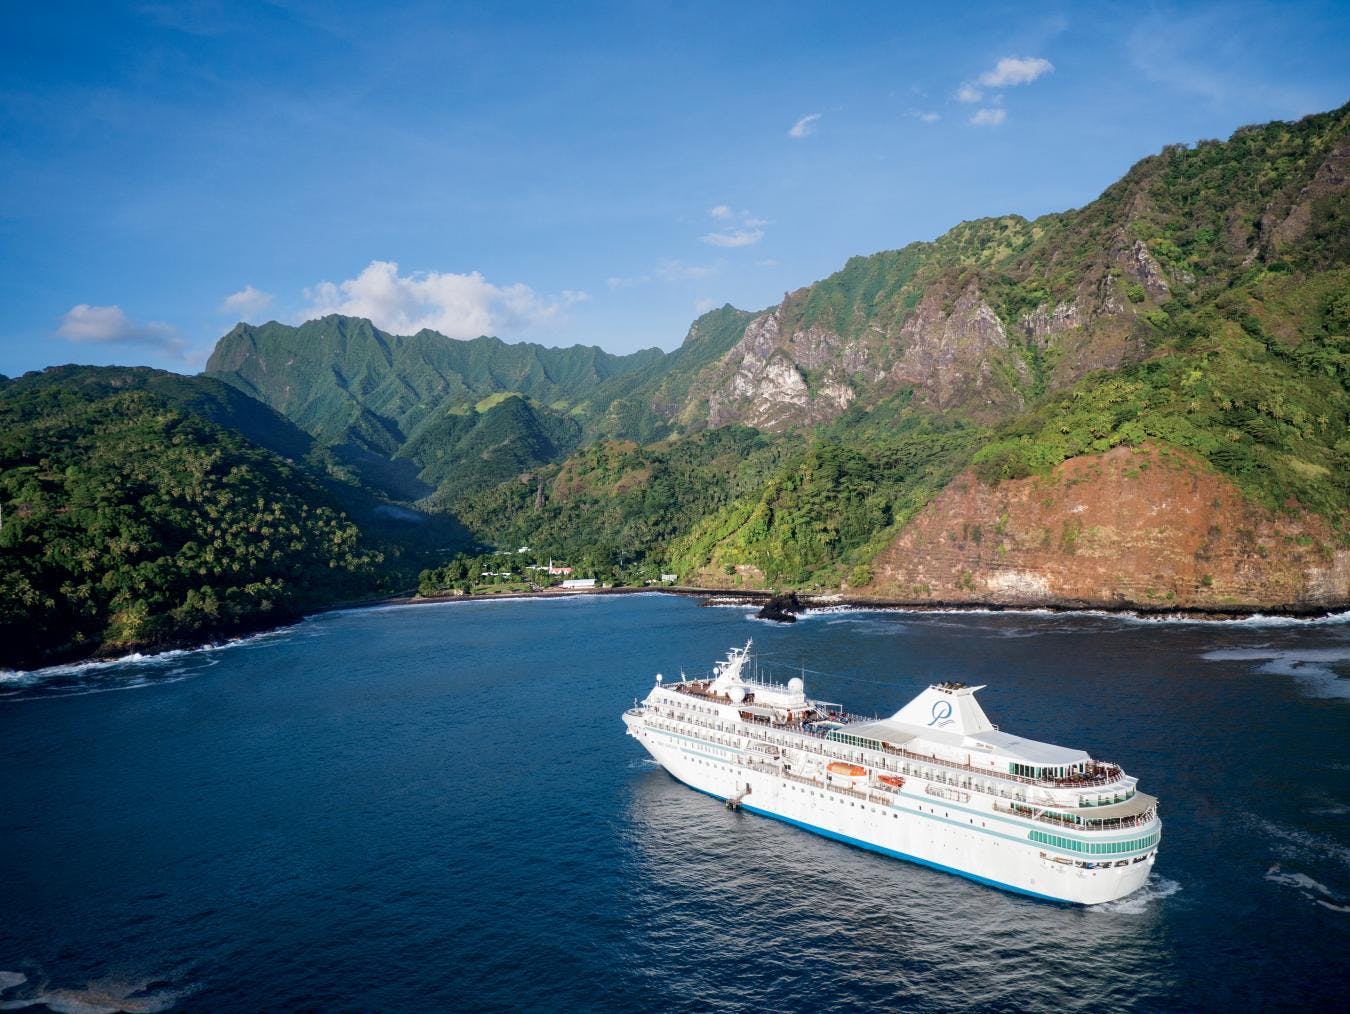 Paul Gauguin Cruises up close in the South Pacific.